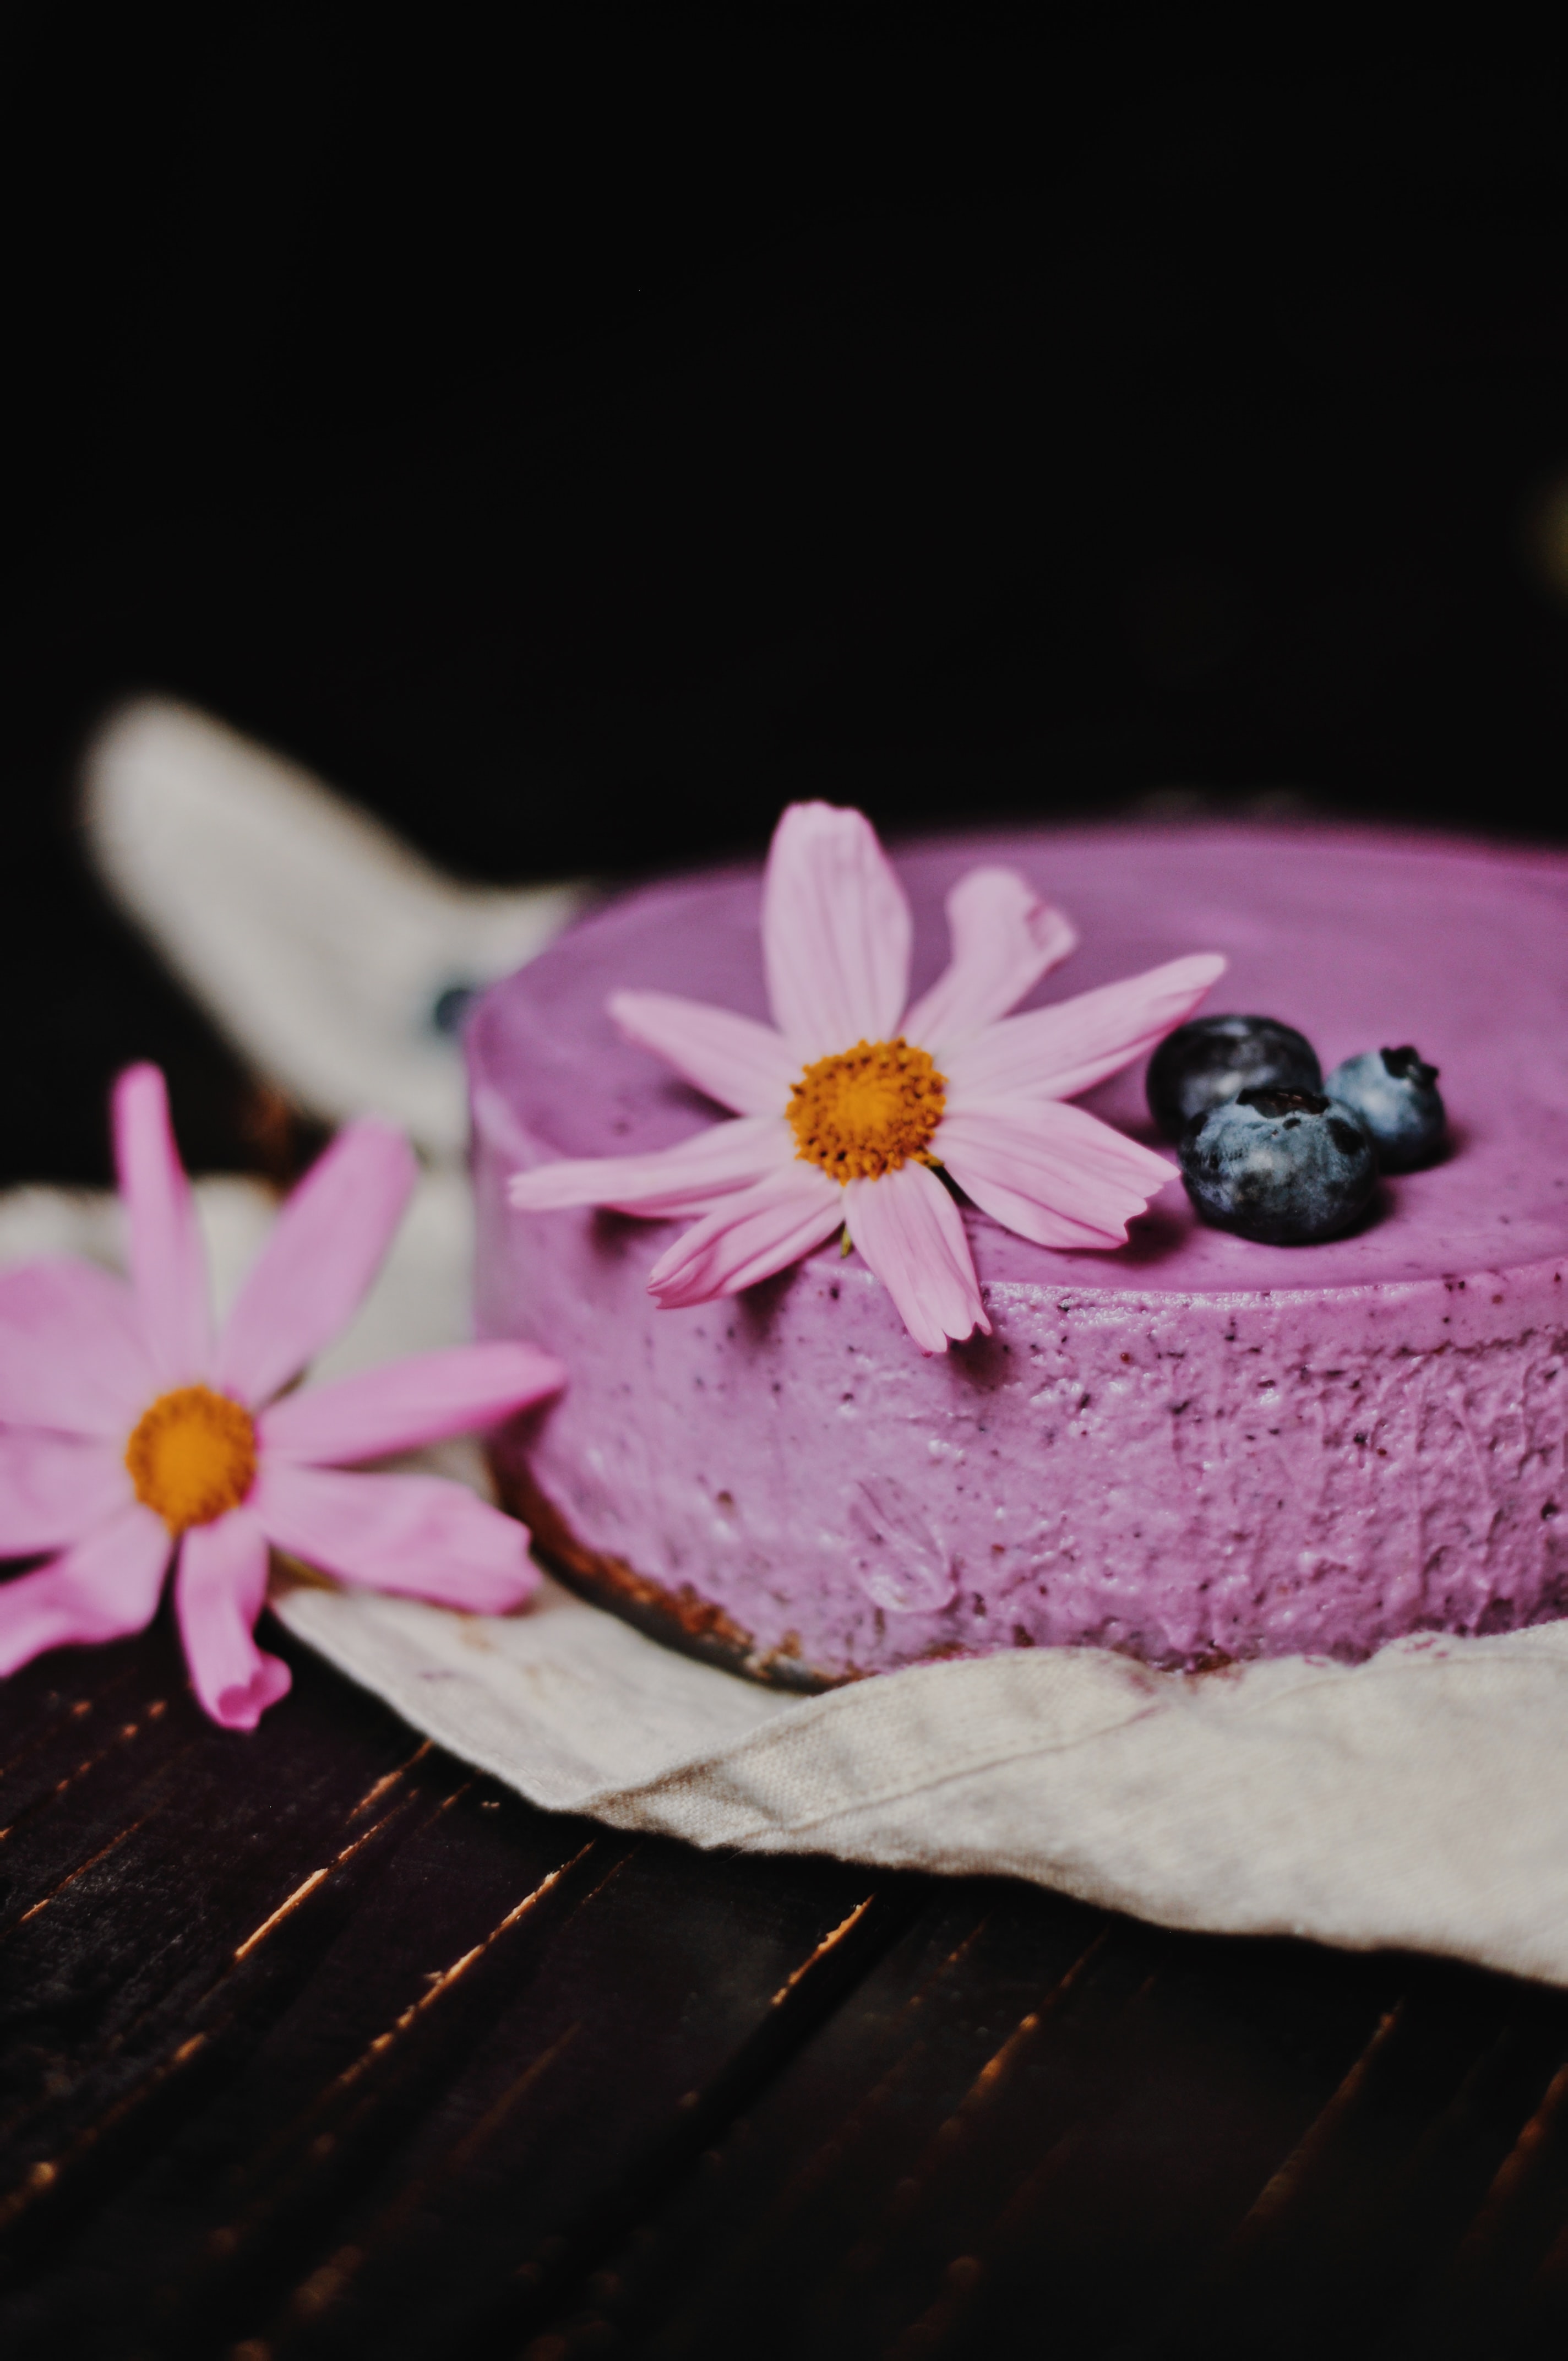 bakery products, flowers, food, bilberries, baking, pie, cheesecake cell phone wallpapers